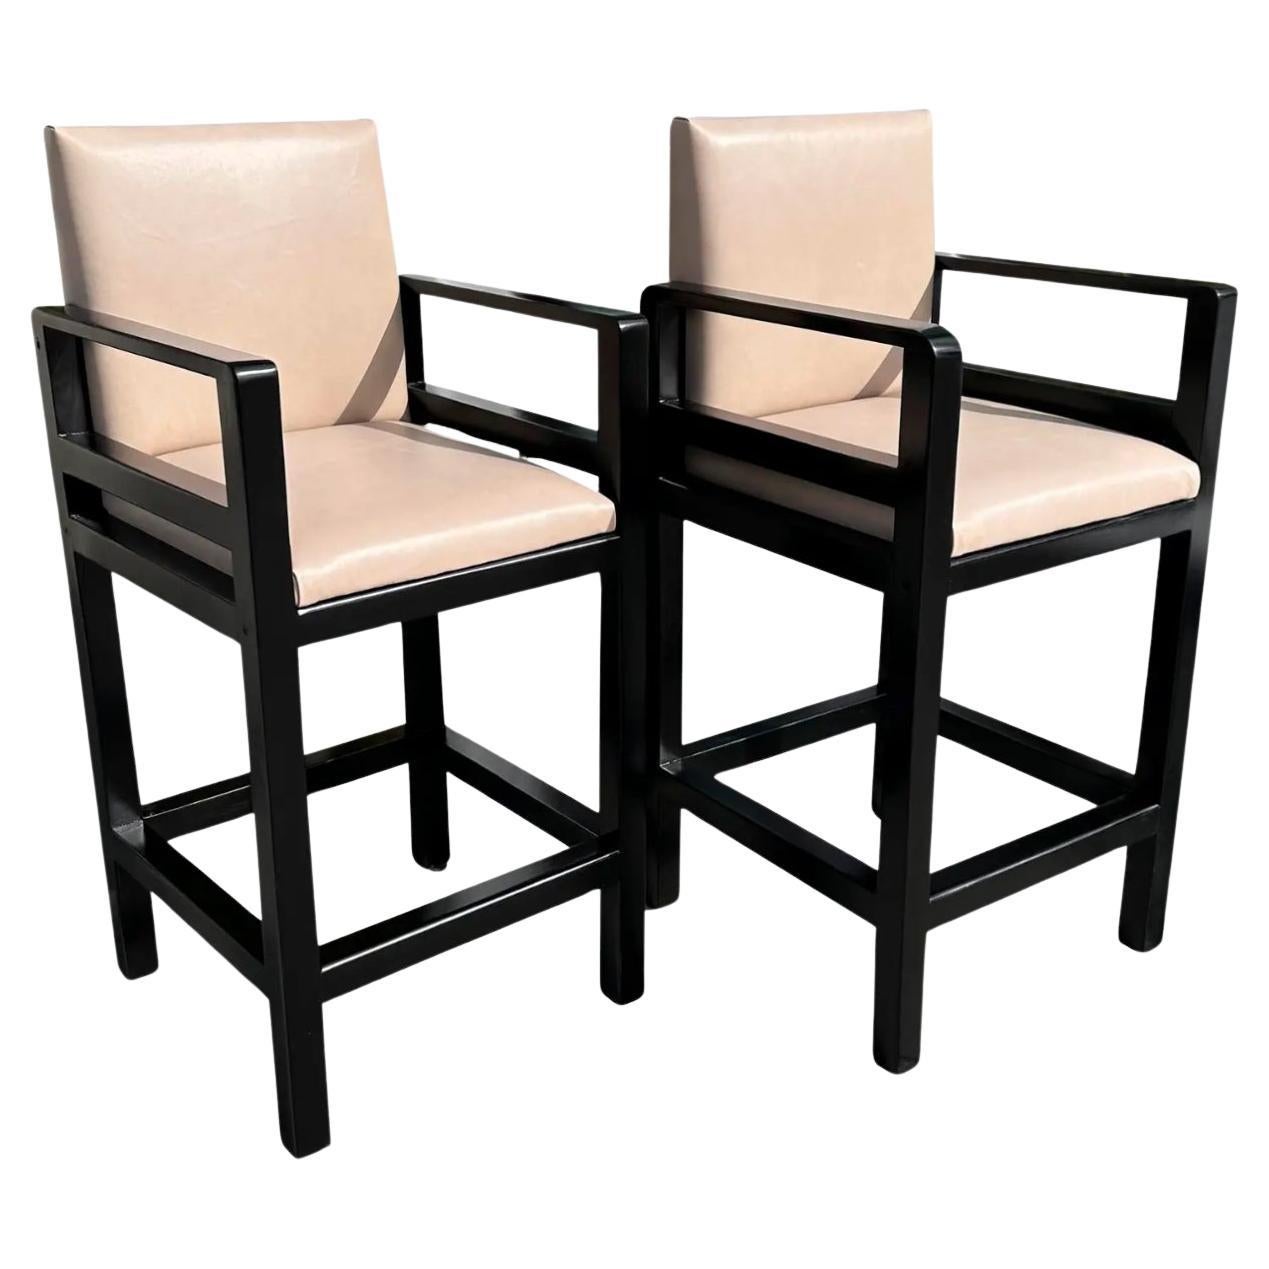 Pair of Art Deco Style Rose Tarlow Melrose House Leather Barstools